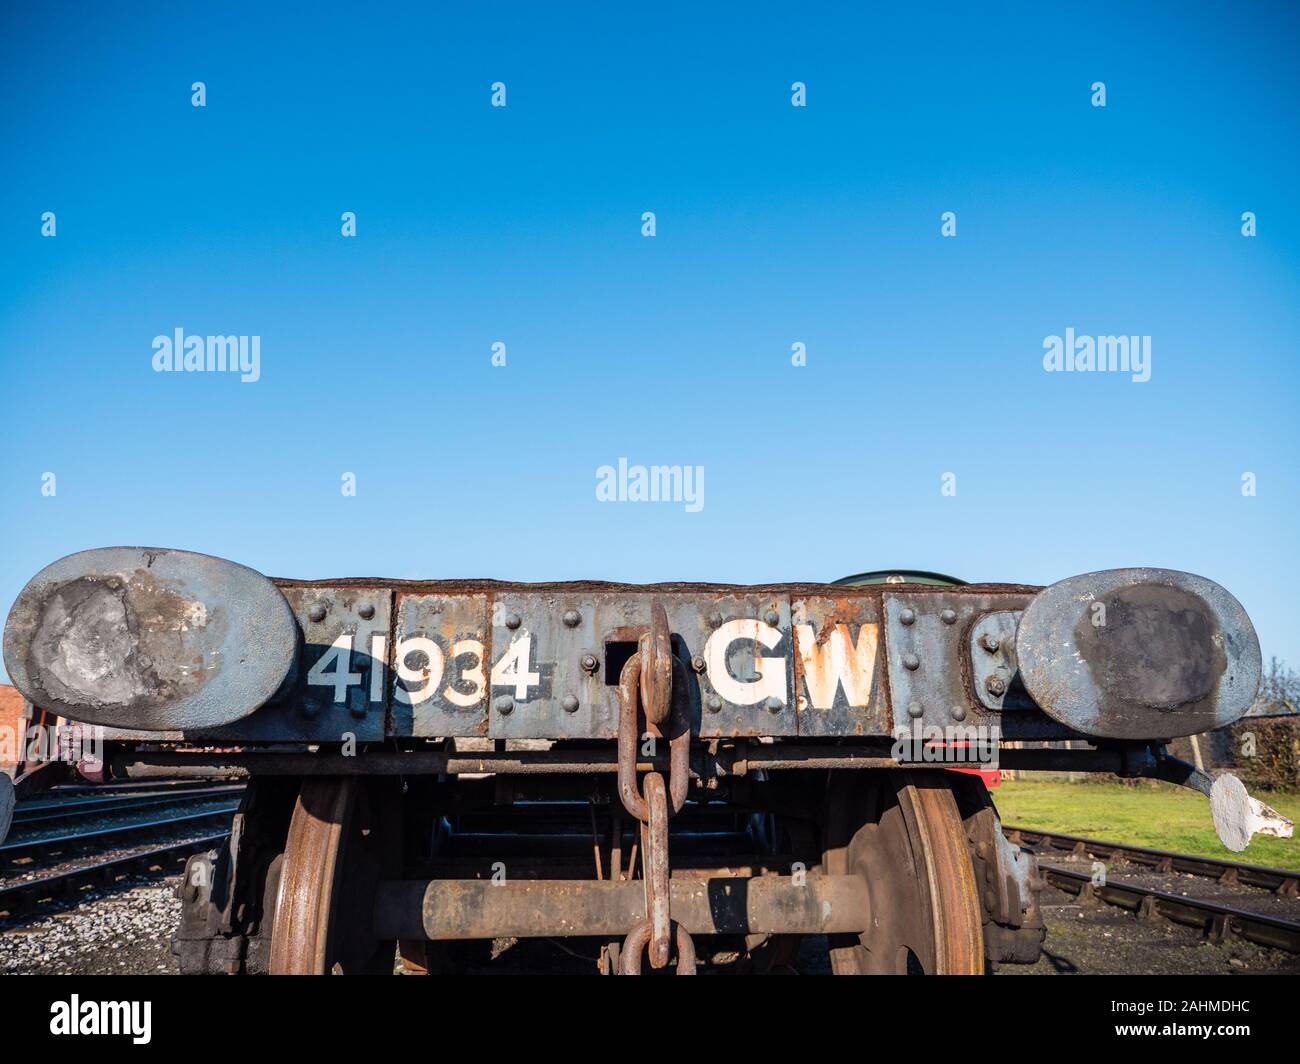 No 41934 - Bogie Well Wagon “Crocodile F”, Abandoned at Dunkirk, Reclaimed at D Day, Didcot Railway Centre, Didcot, Oxfordshire, England, UK, GB. Stock Photo